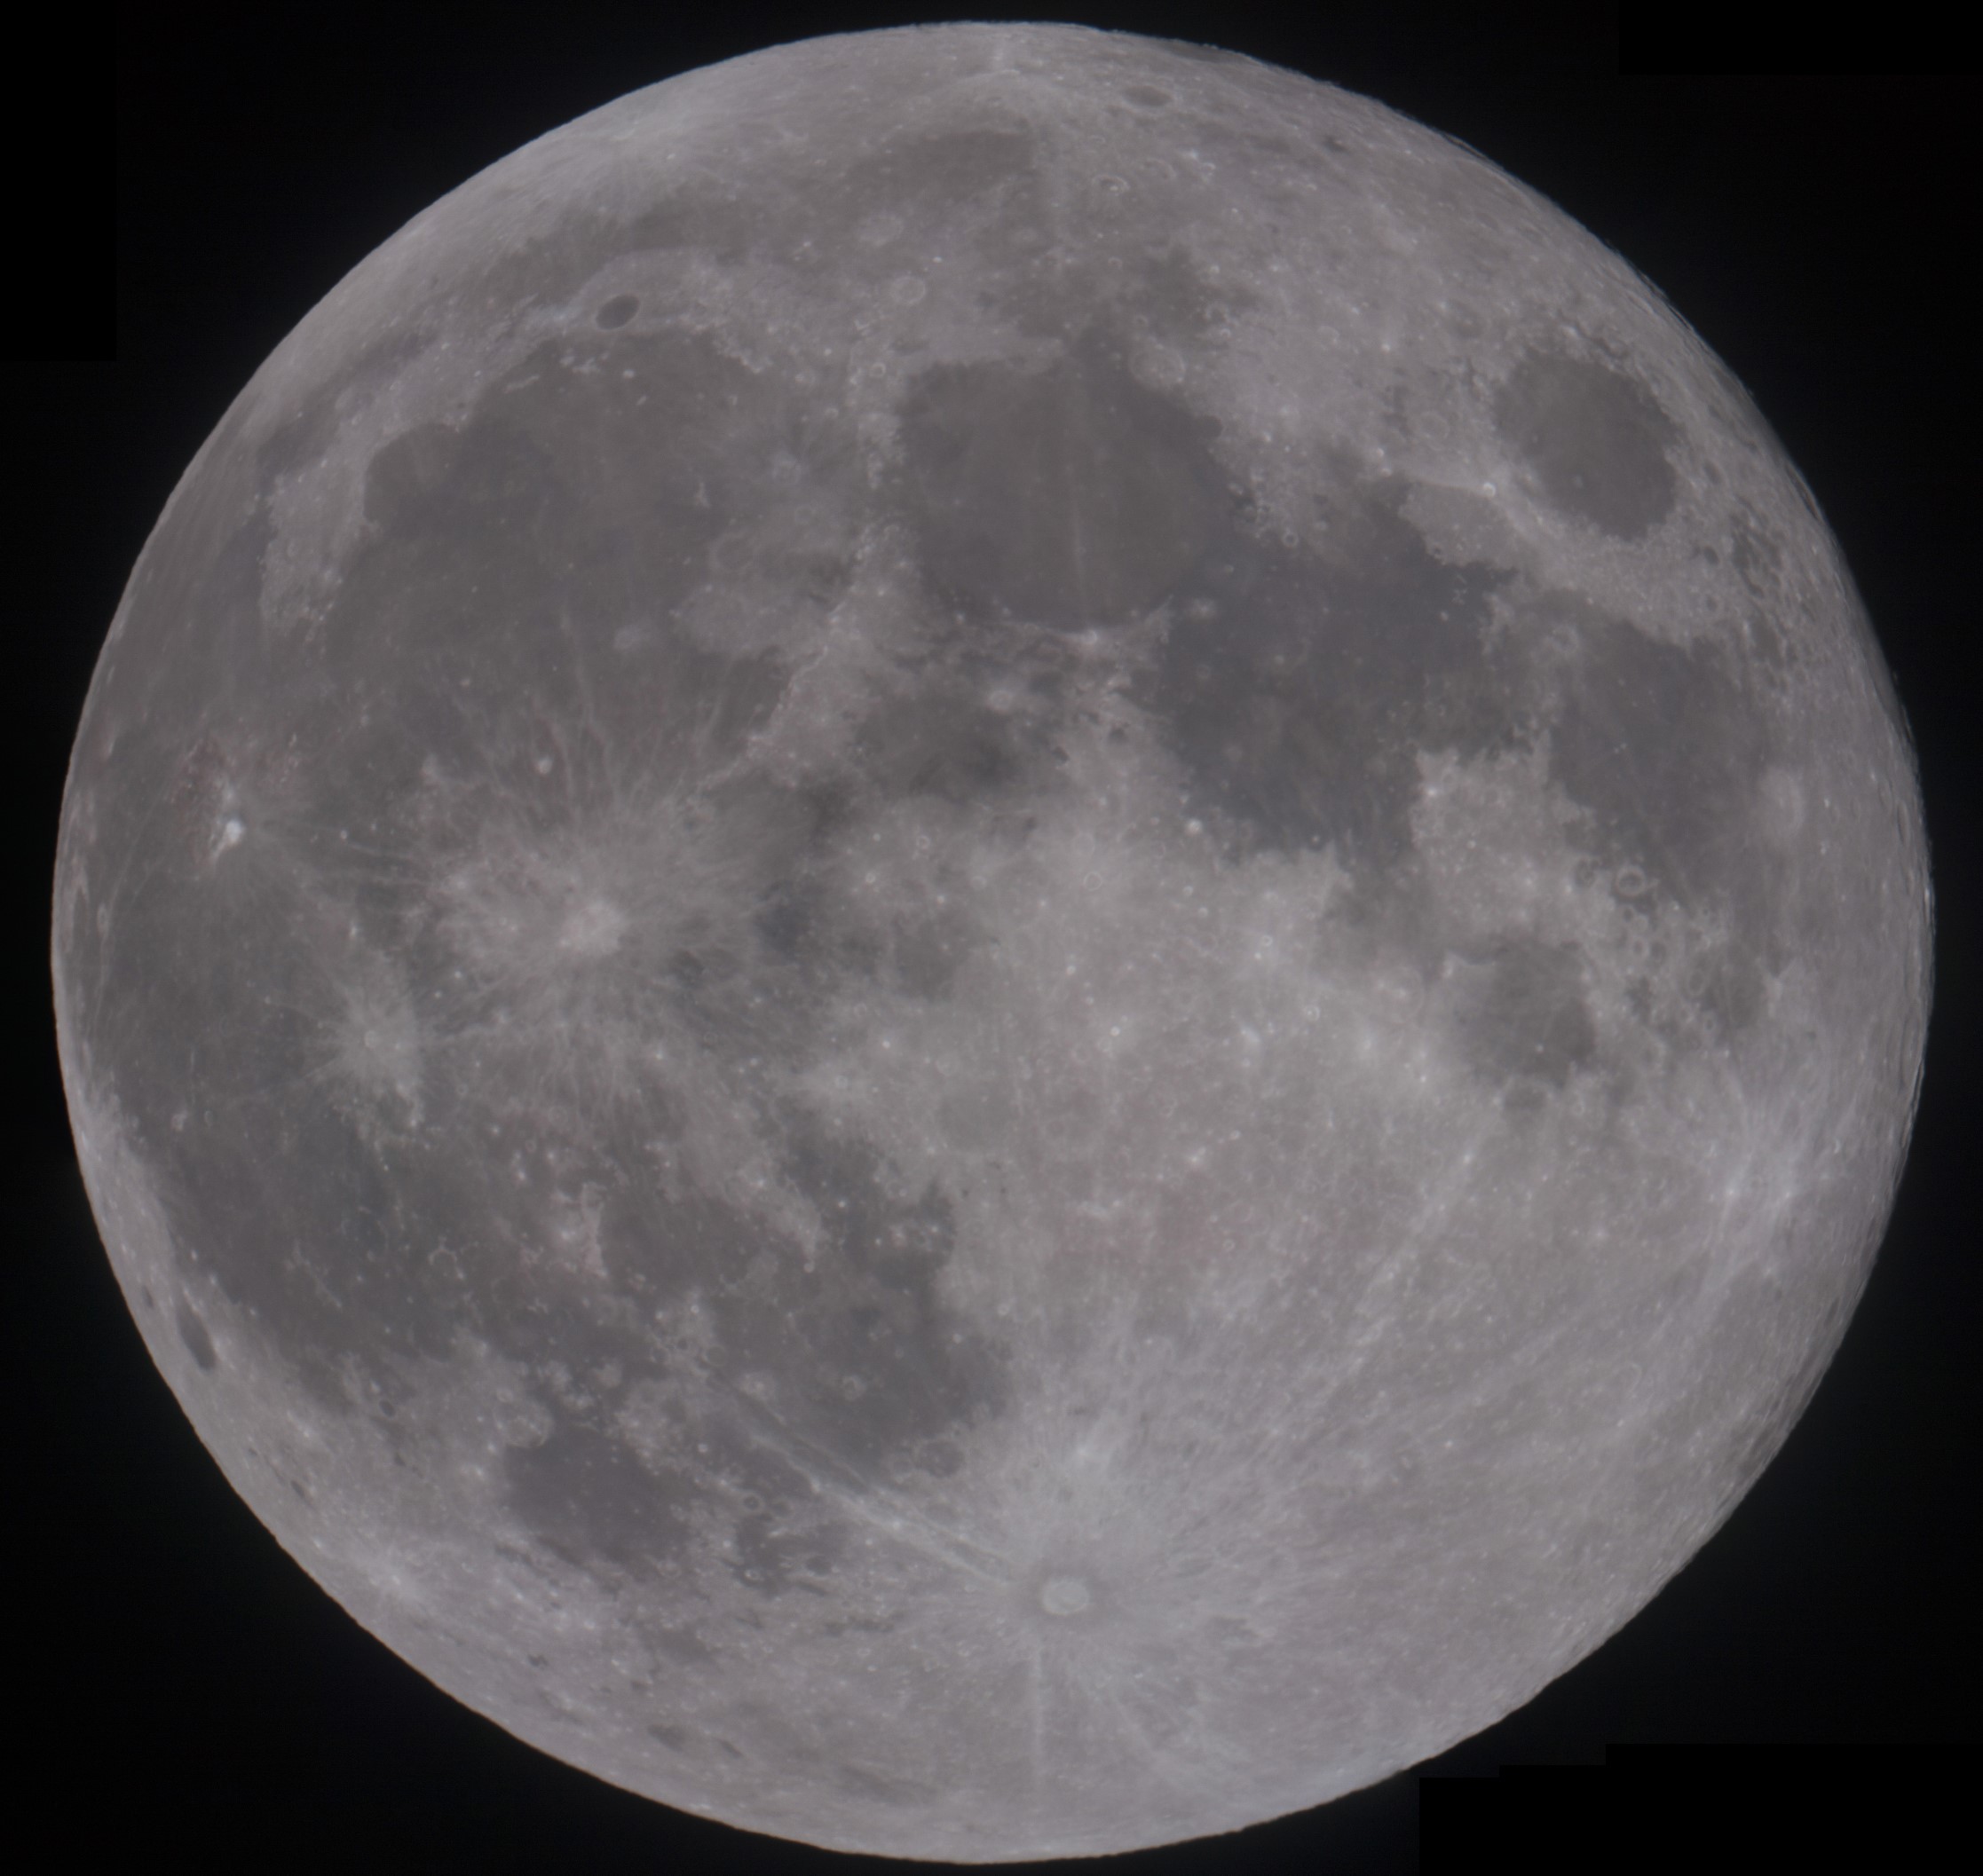 Supermoon picture taken by observatory